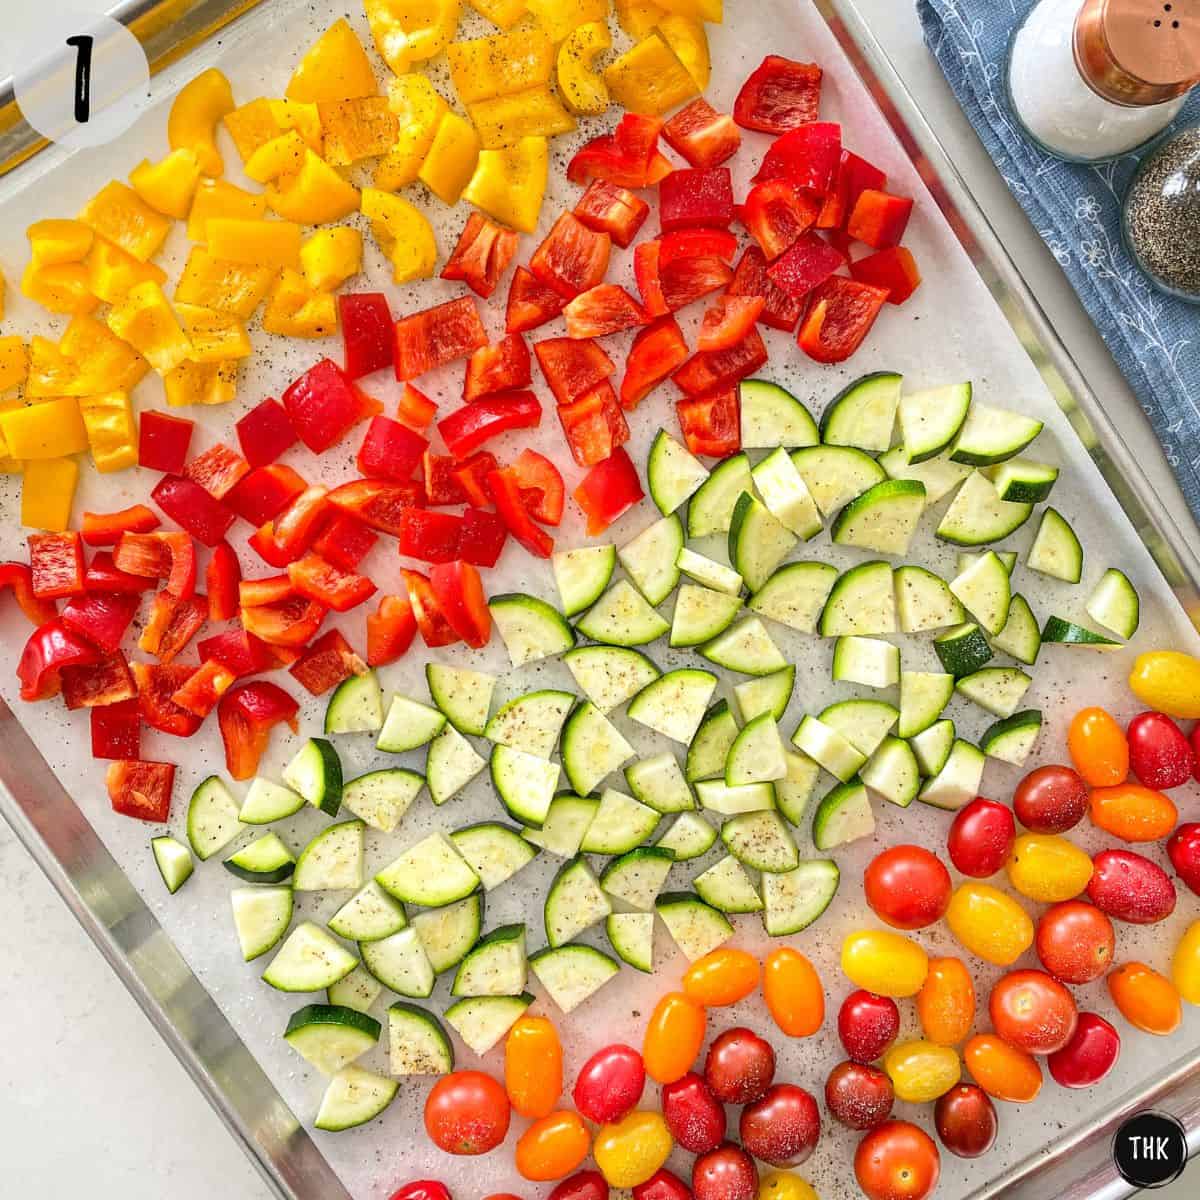 Baking tray with tomatoes, zucchini, and bell peppers inside.